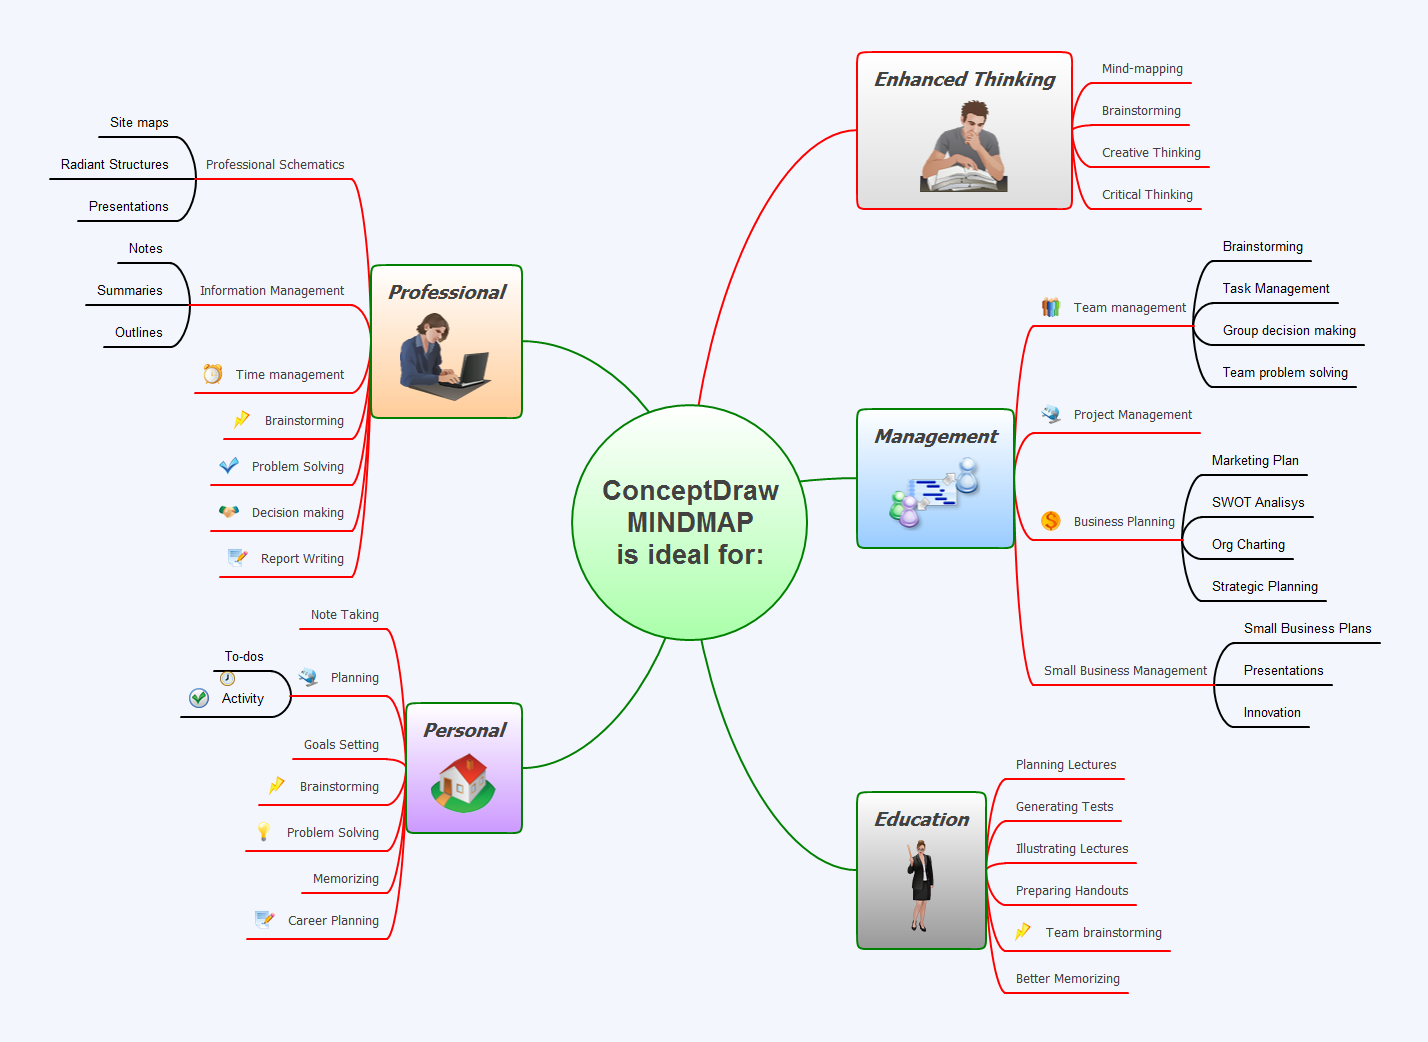 Concept Draw Office 10.0.0.0 + MINDMAP 15.0.0.275 for windows download free